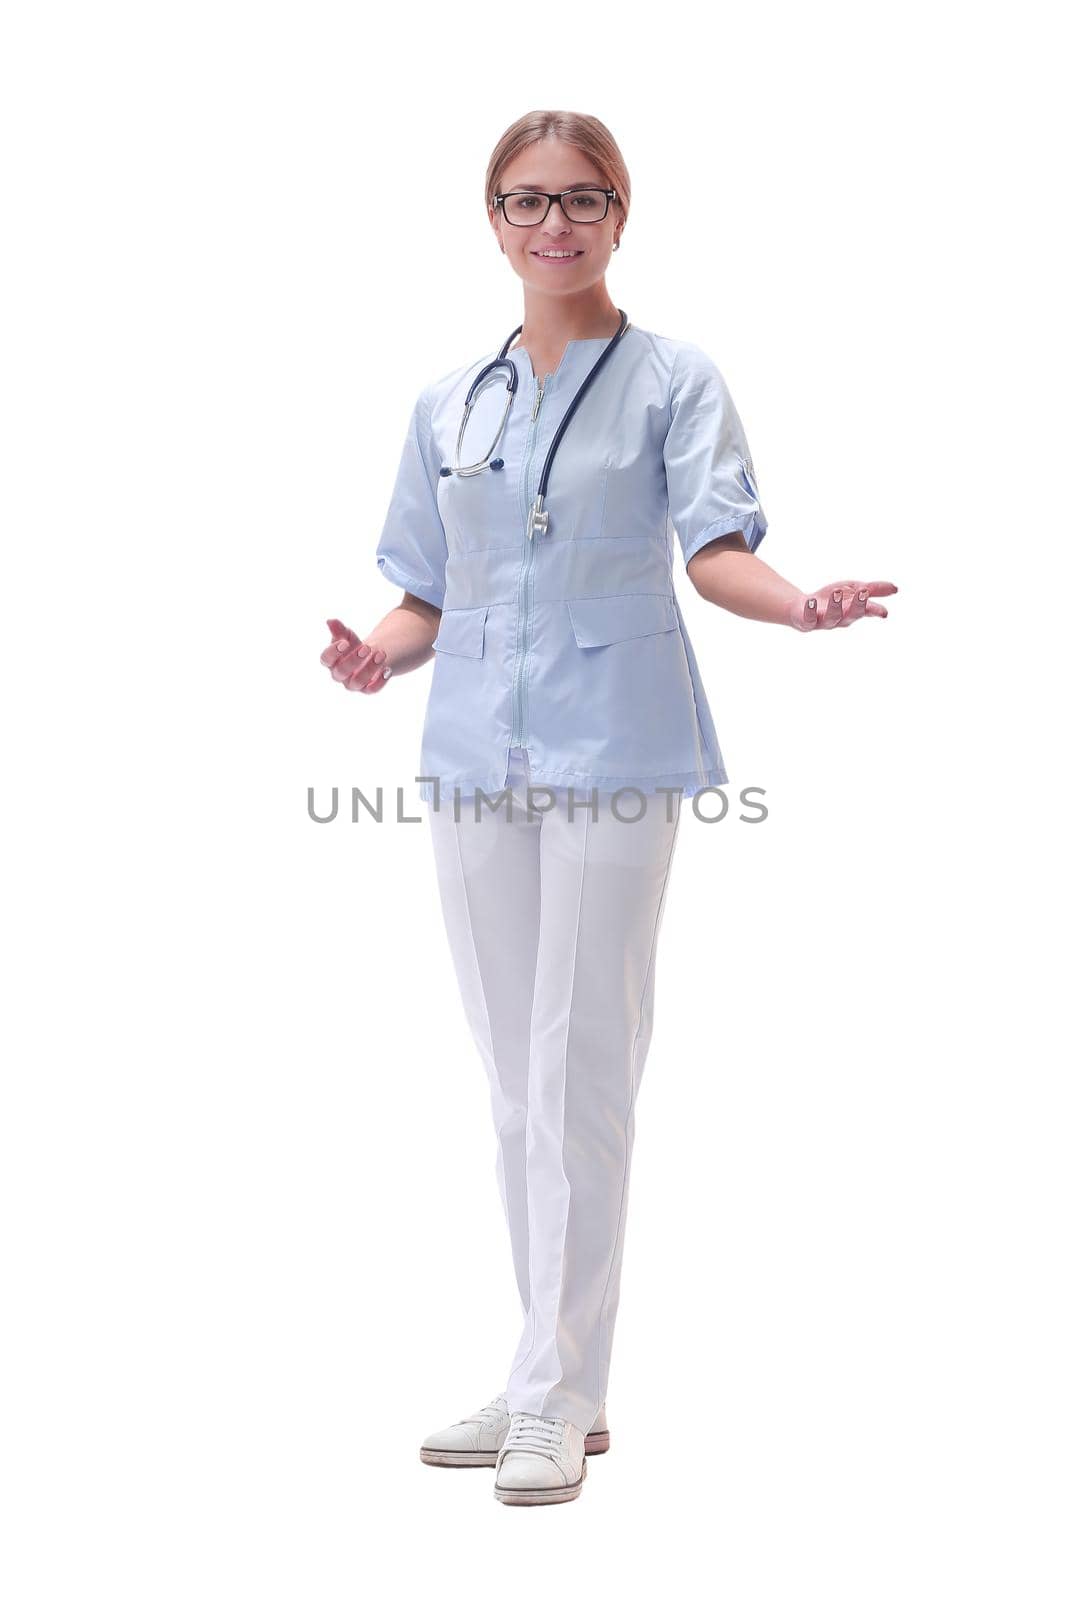 in full growth. friendly medical doctor woman. isolated on white background